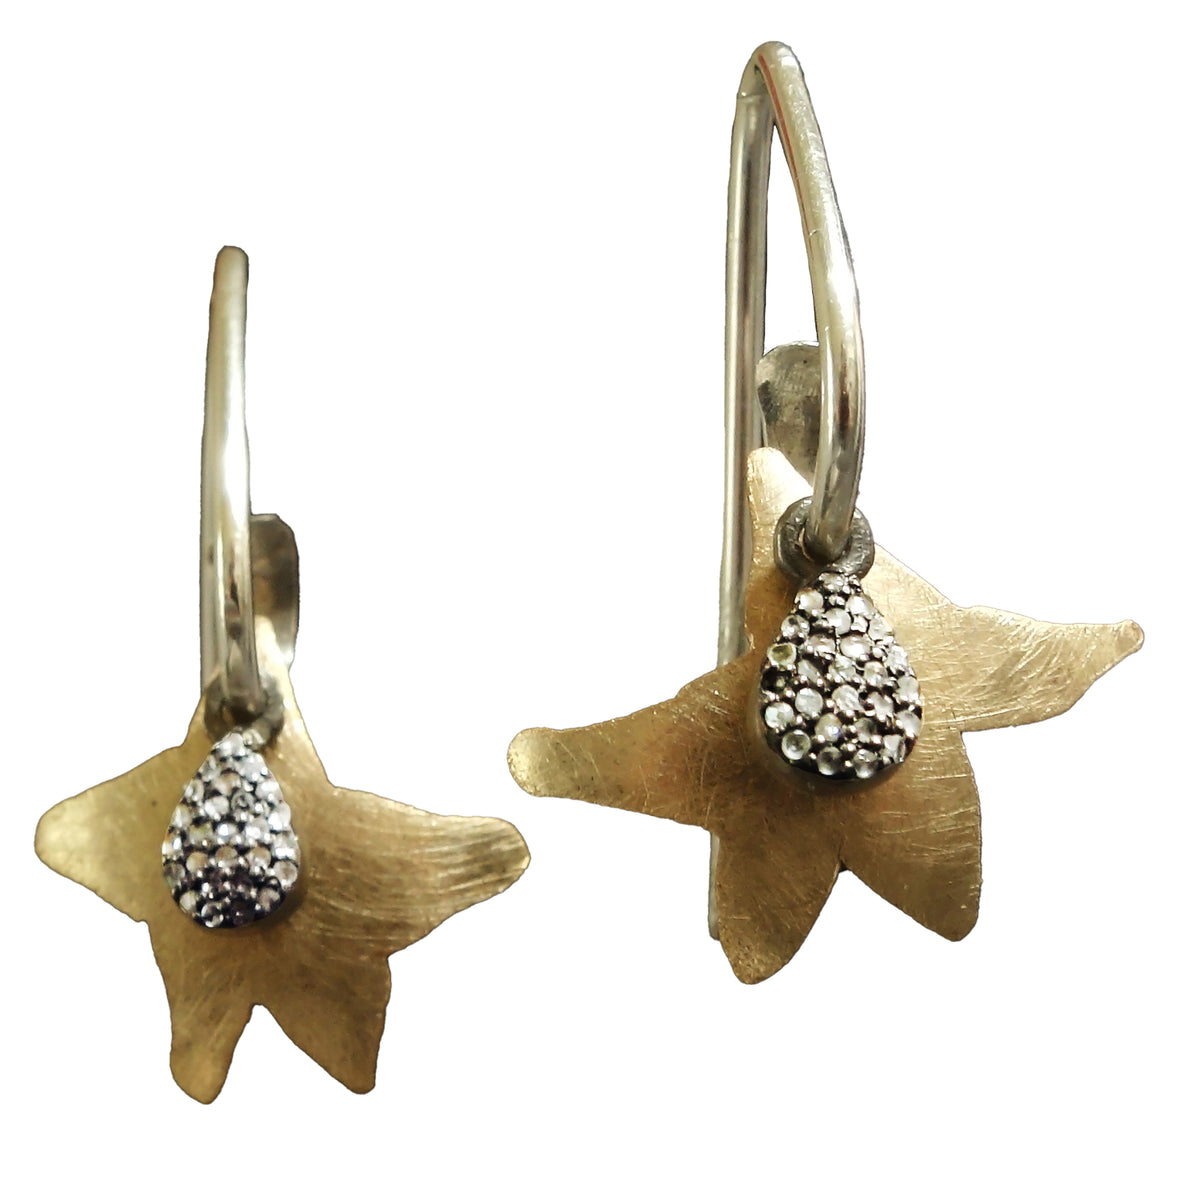 Your Wish is My Command: hammered gold + diamond earring